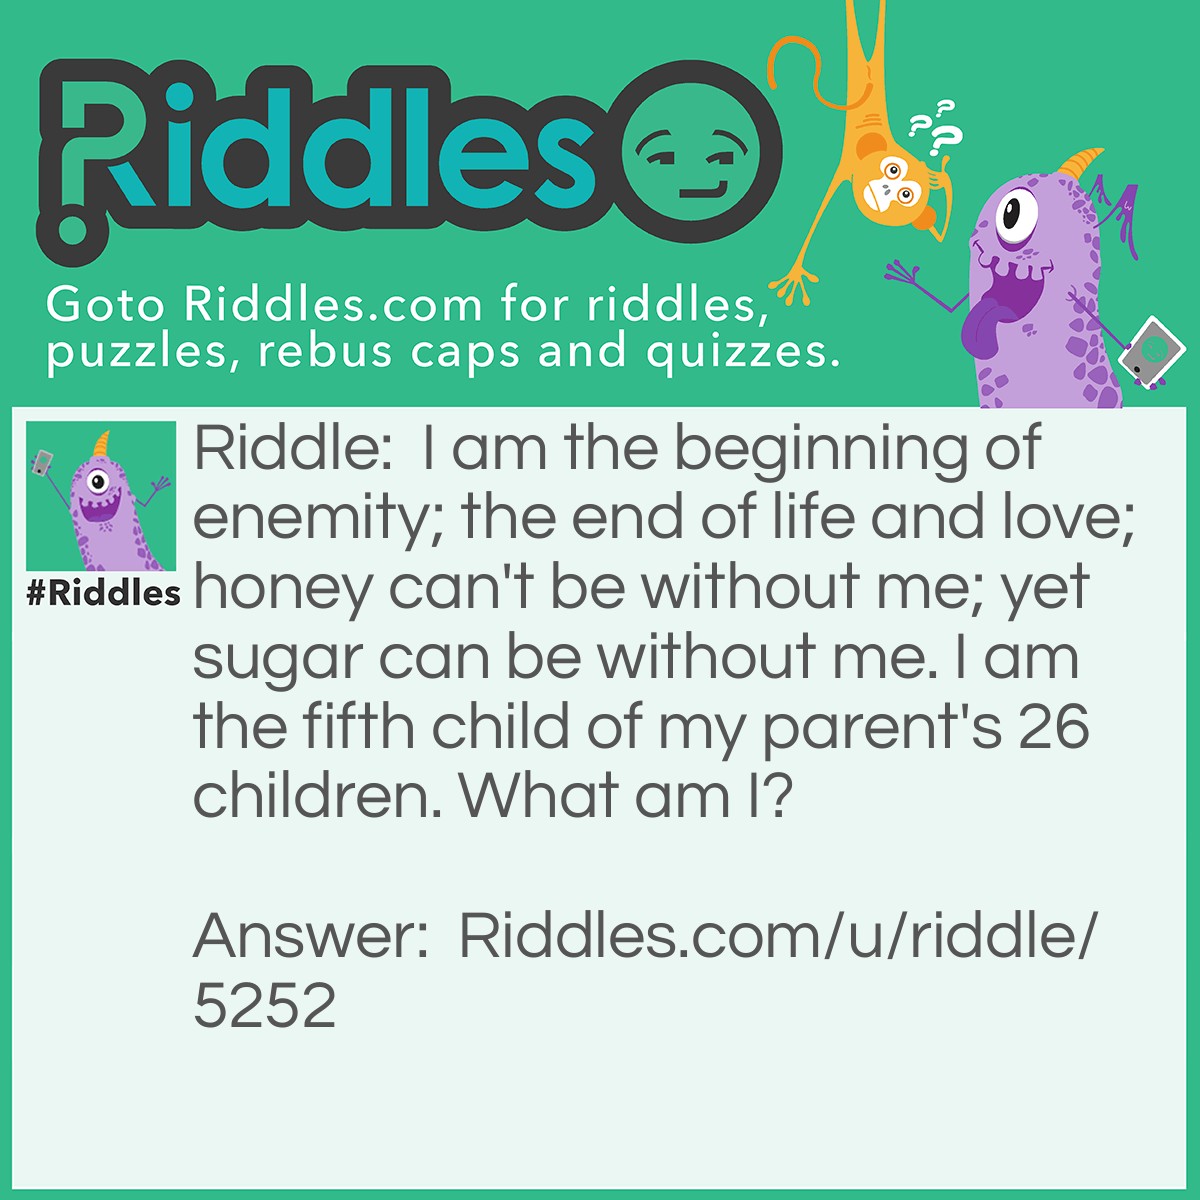 Riddle: I am the beginning of enemity; the end of life and love; honey can't be without me; yet sugar can be without me. I am the fifth child of my parent's 26 children. What am I? Answer: The letter E.